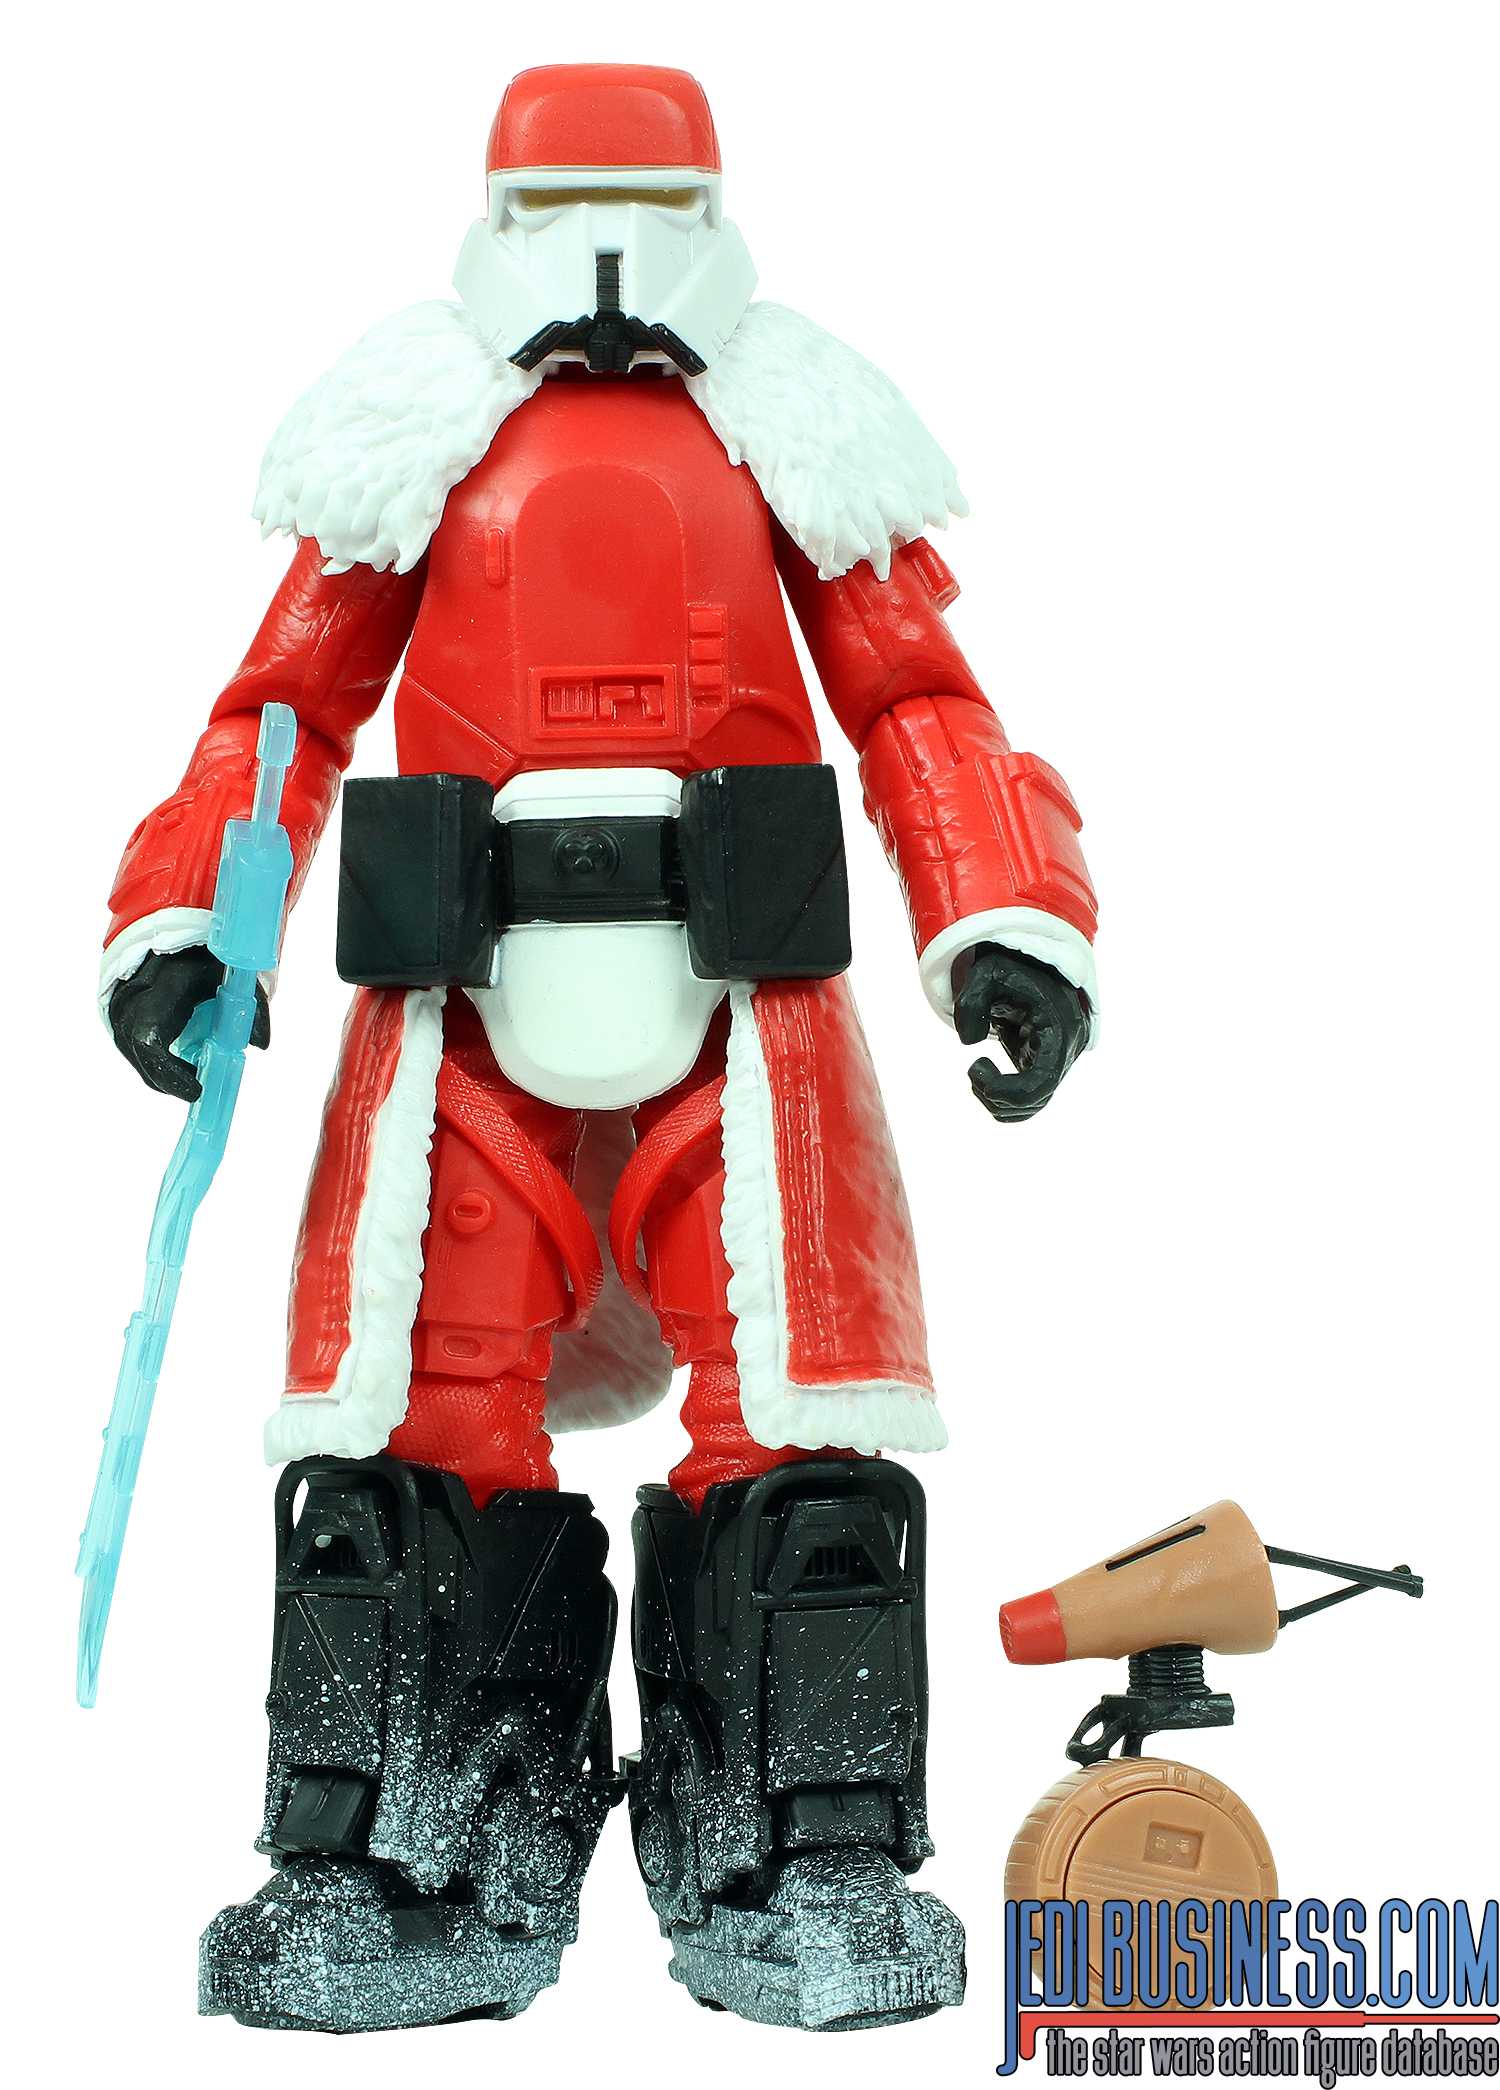 Range Trooper 2020 Holiday Edition 2-Pack #1 of 5